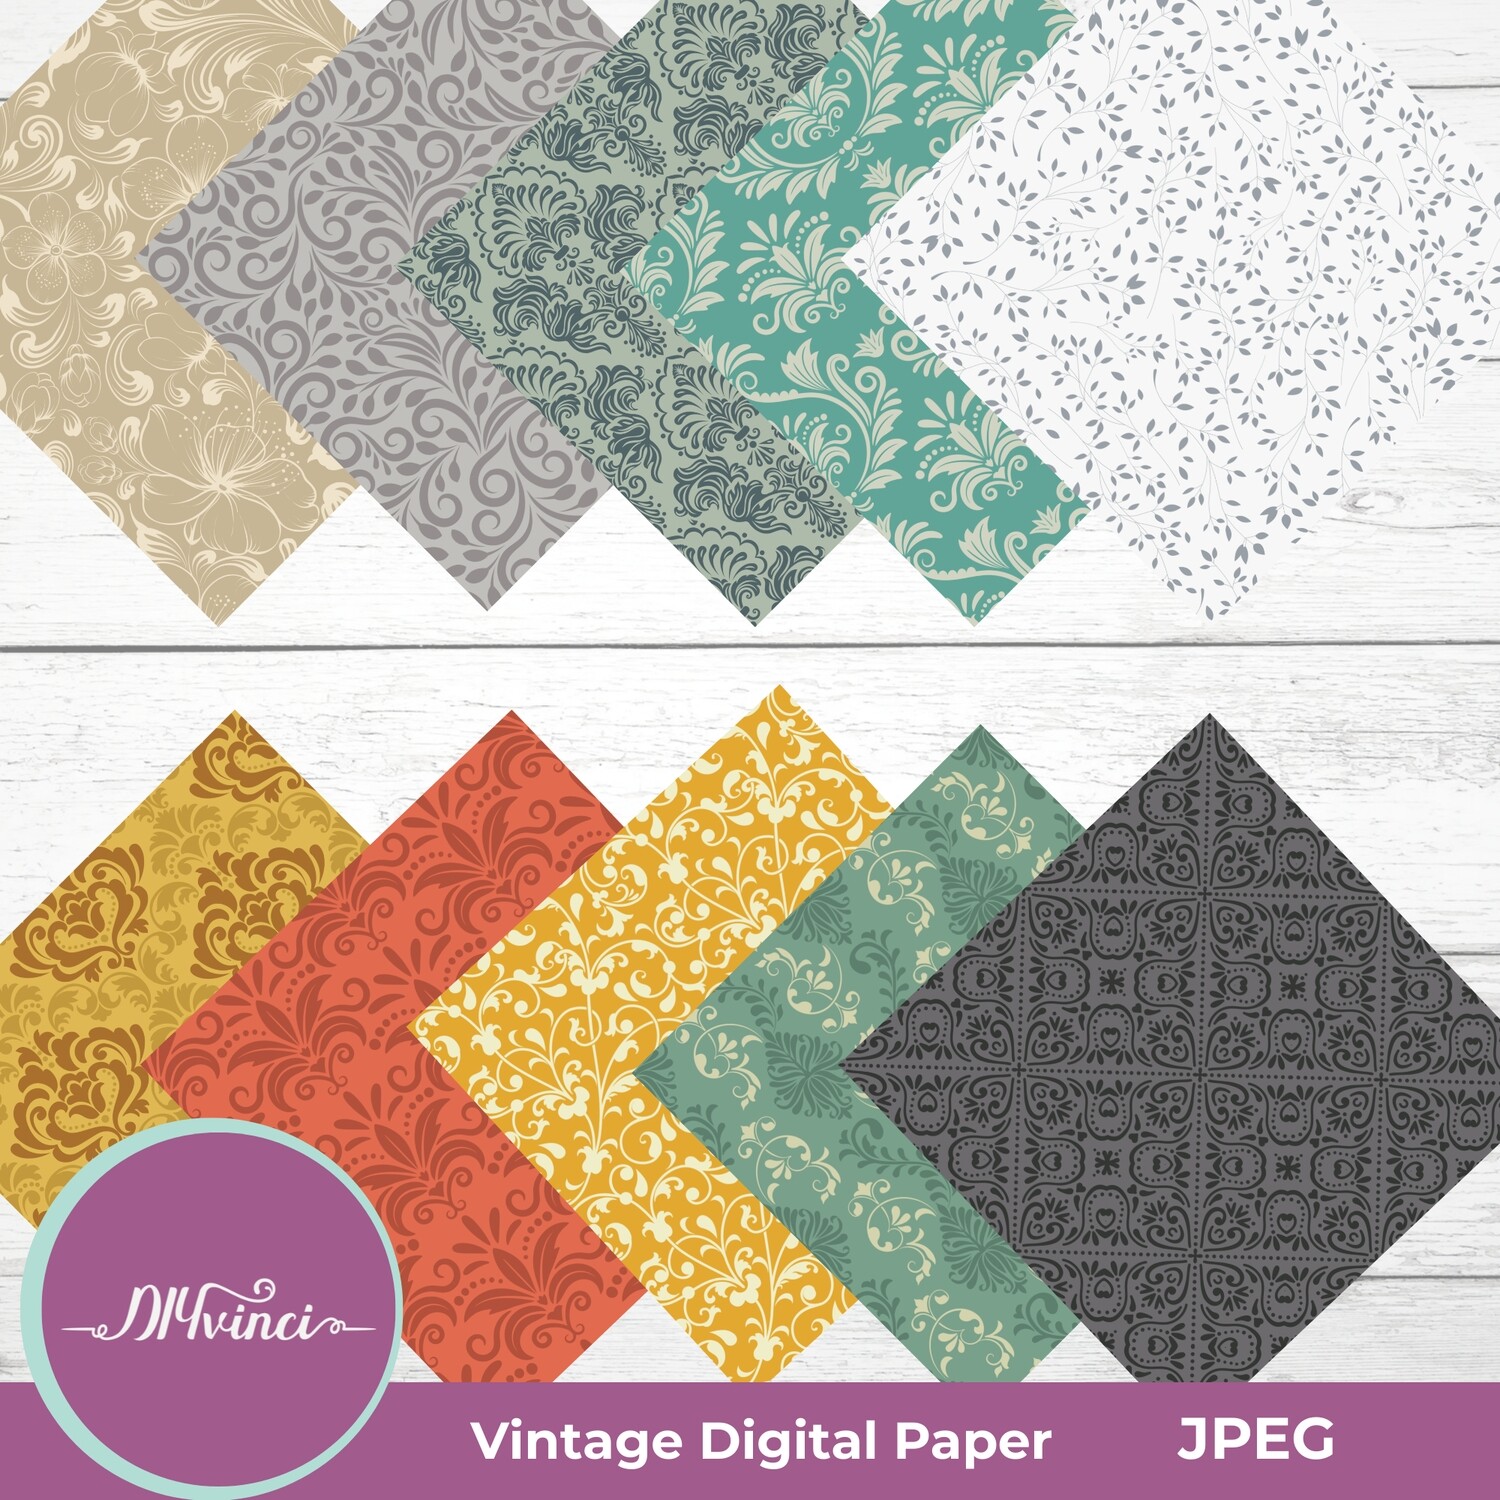 10 Seamless Vintage Digital Paper Patterns - JPEG - Personal & Commercial Use